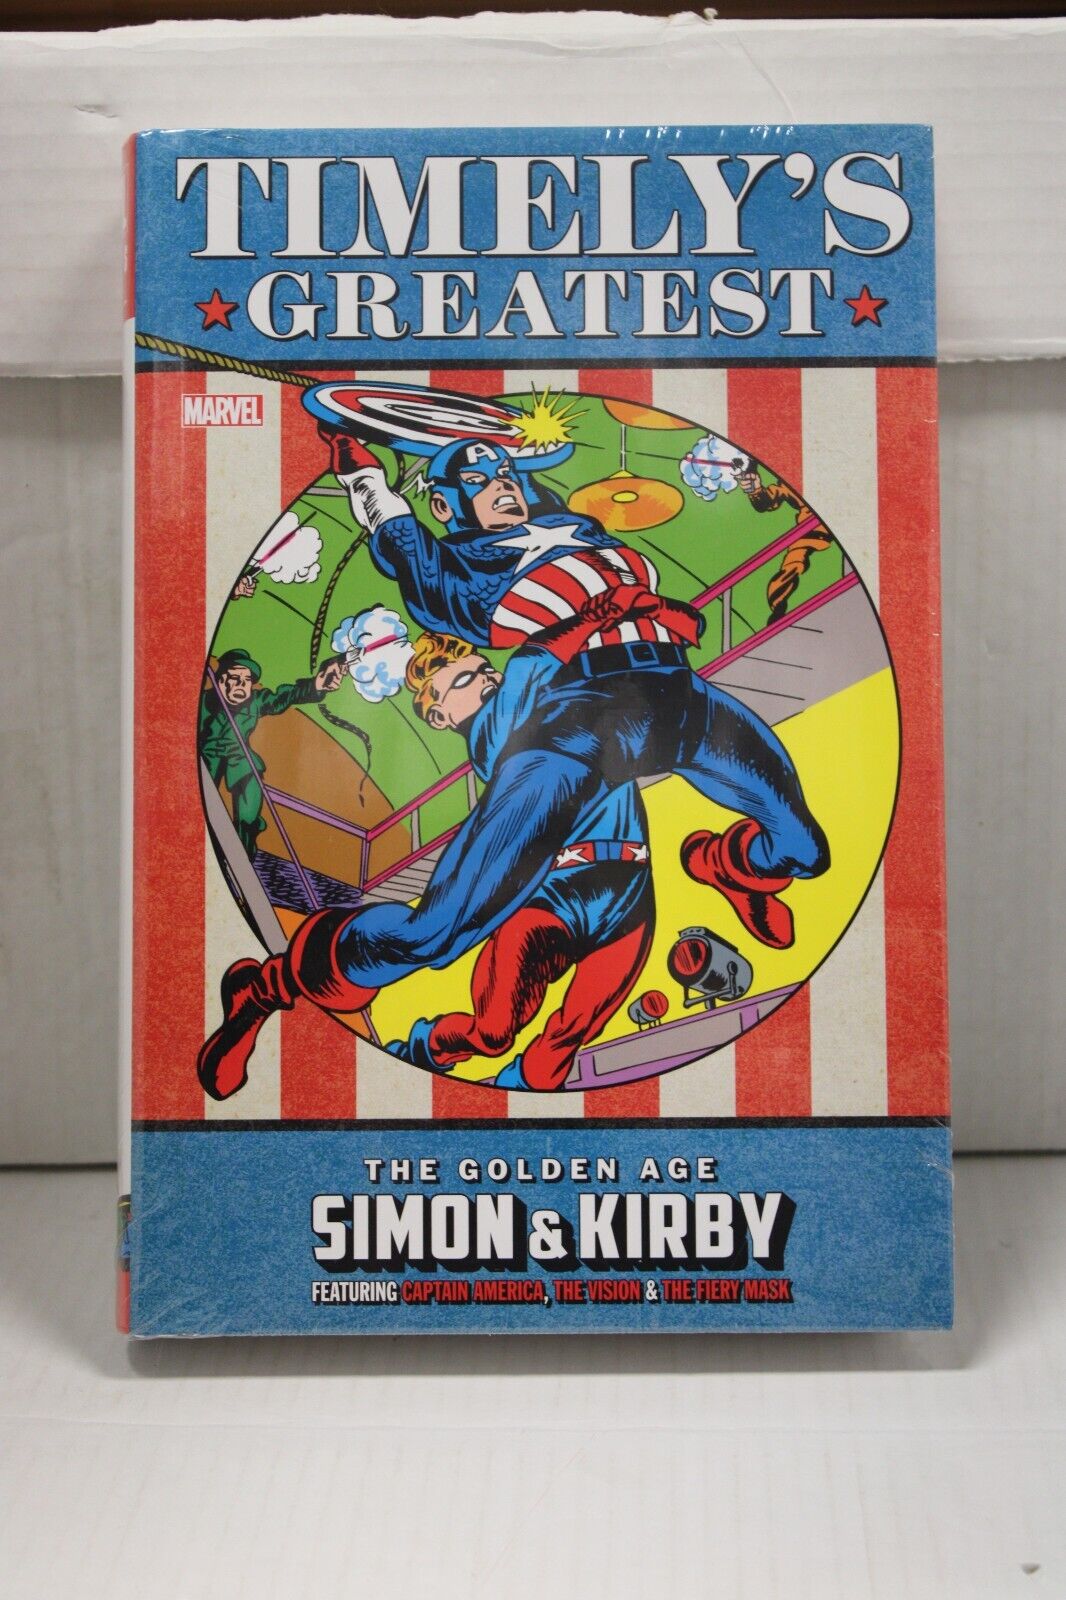 TIMELY'S GREATEST: THE GOLDEN AGE: SIMON AND KIRBY #1B (2019) HC, Marvel Comics